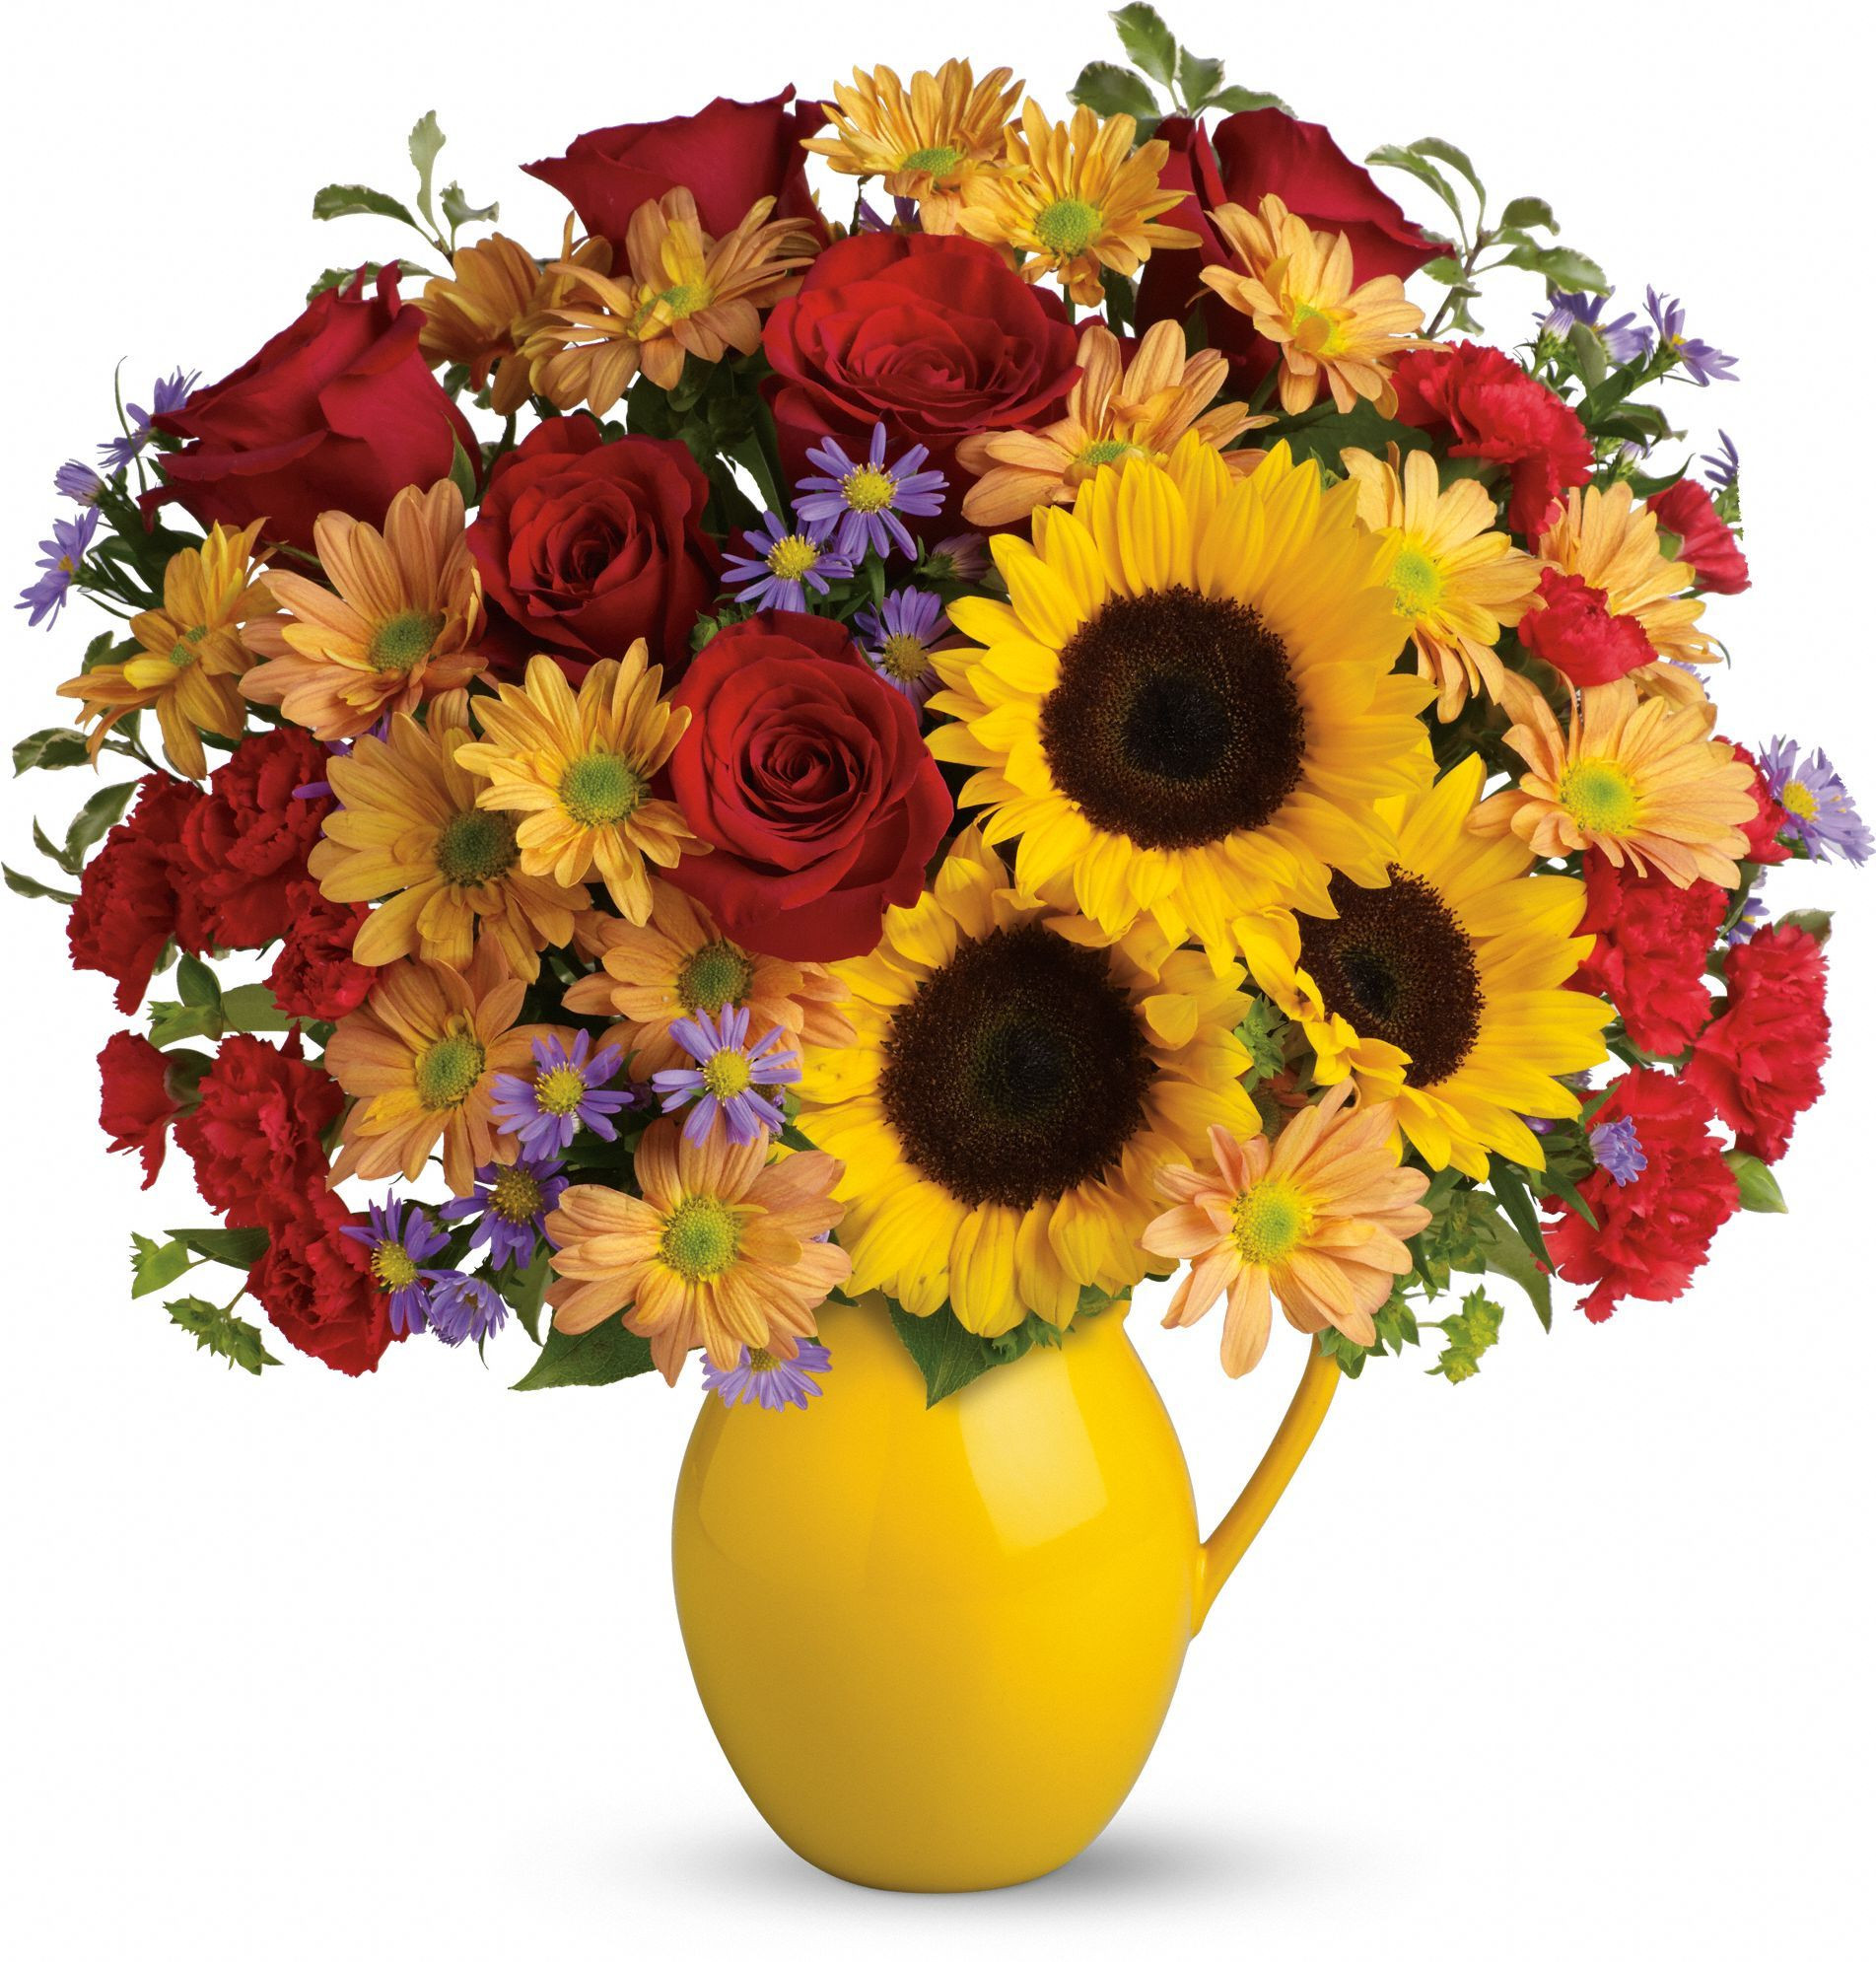 Thanksgiving Flower Delivery
 Teleflora s Sunny Day Pitcher of Joy bouquet